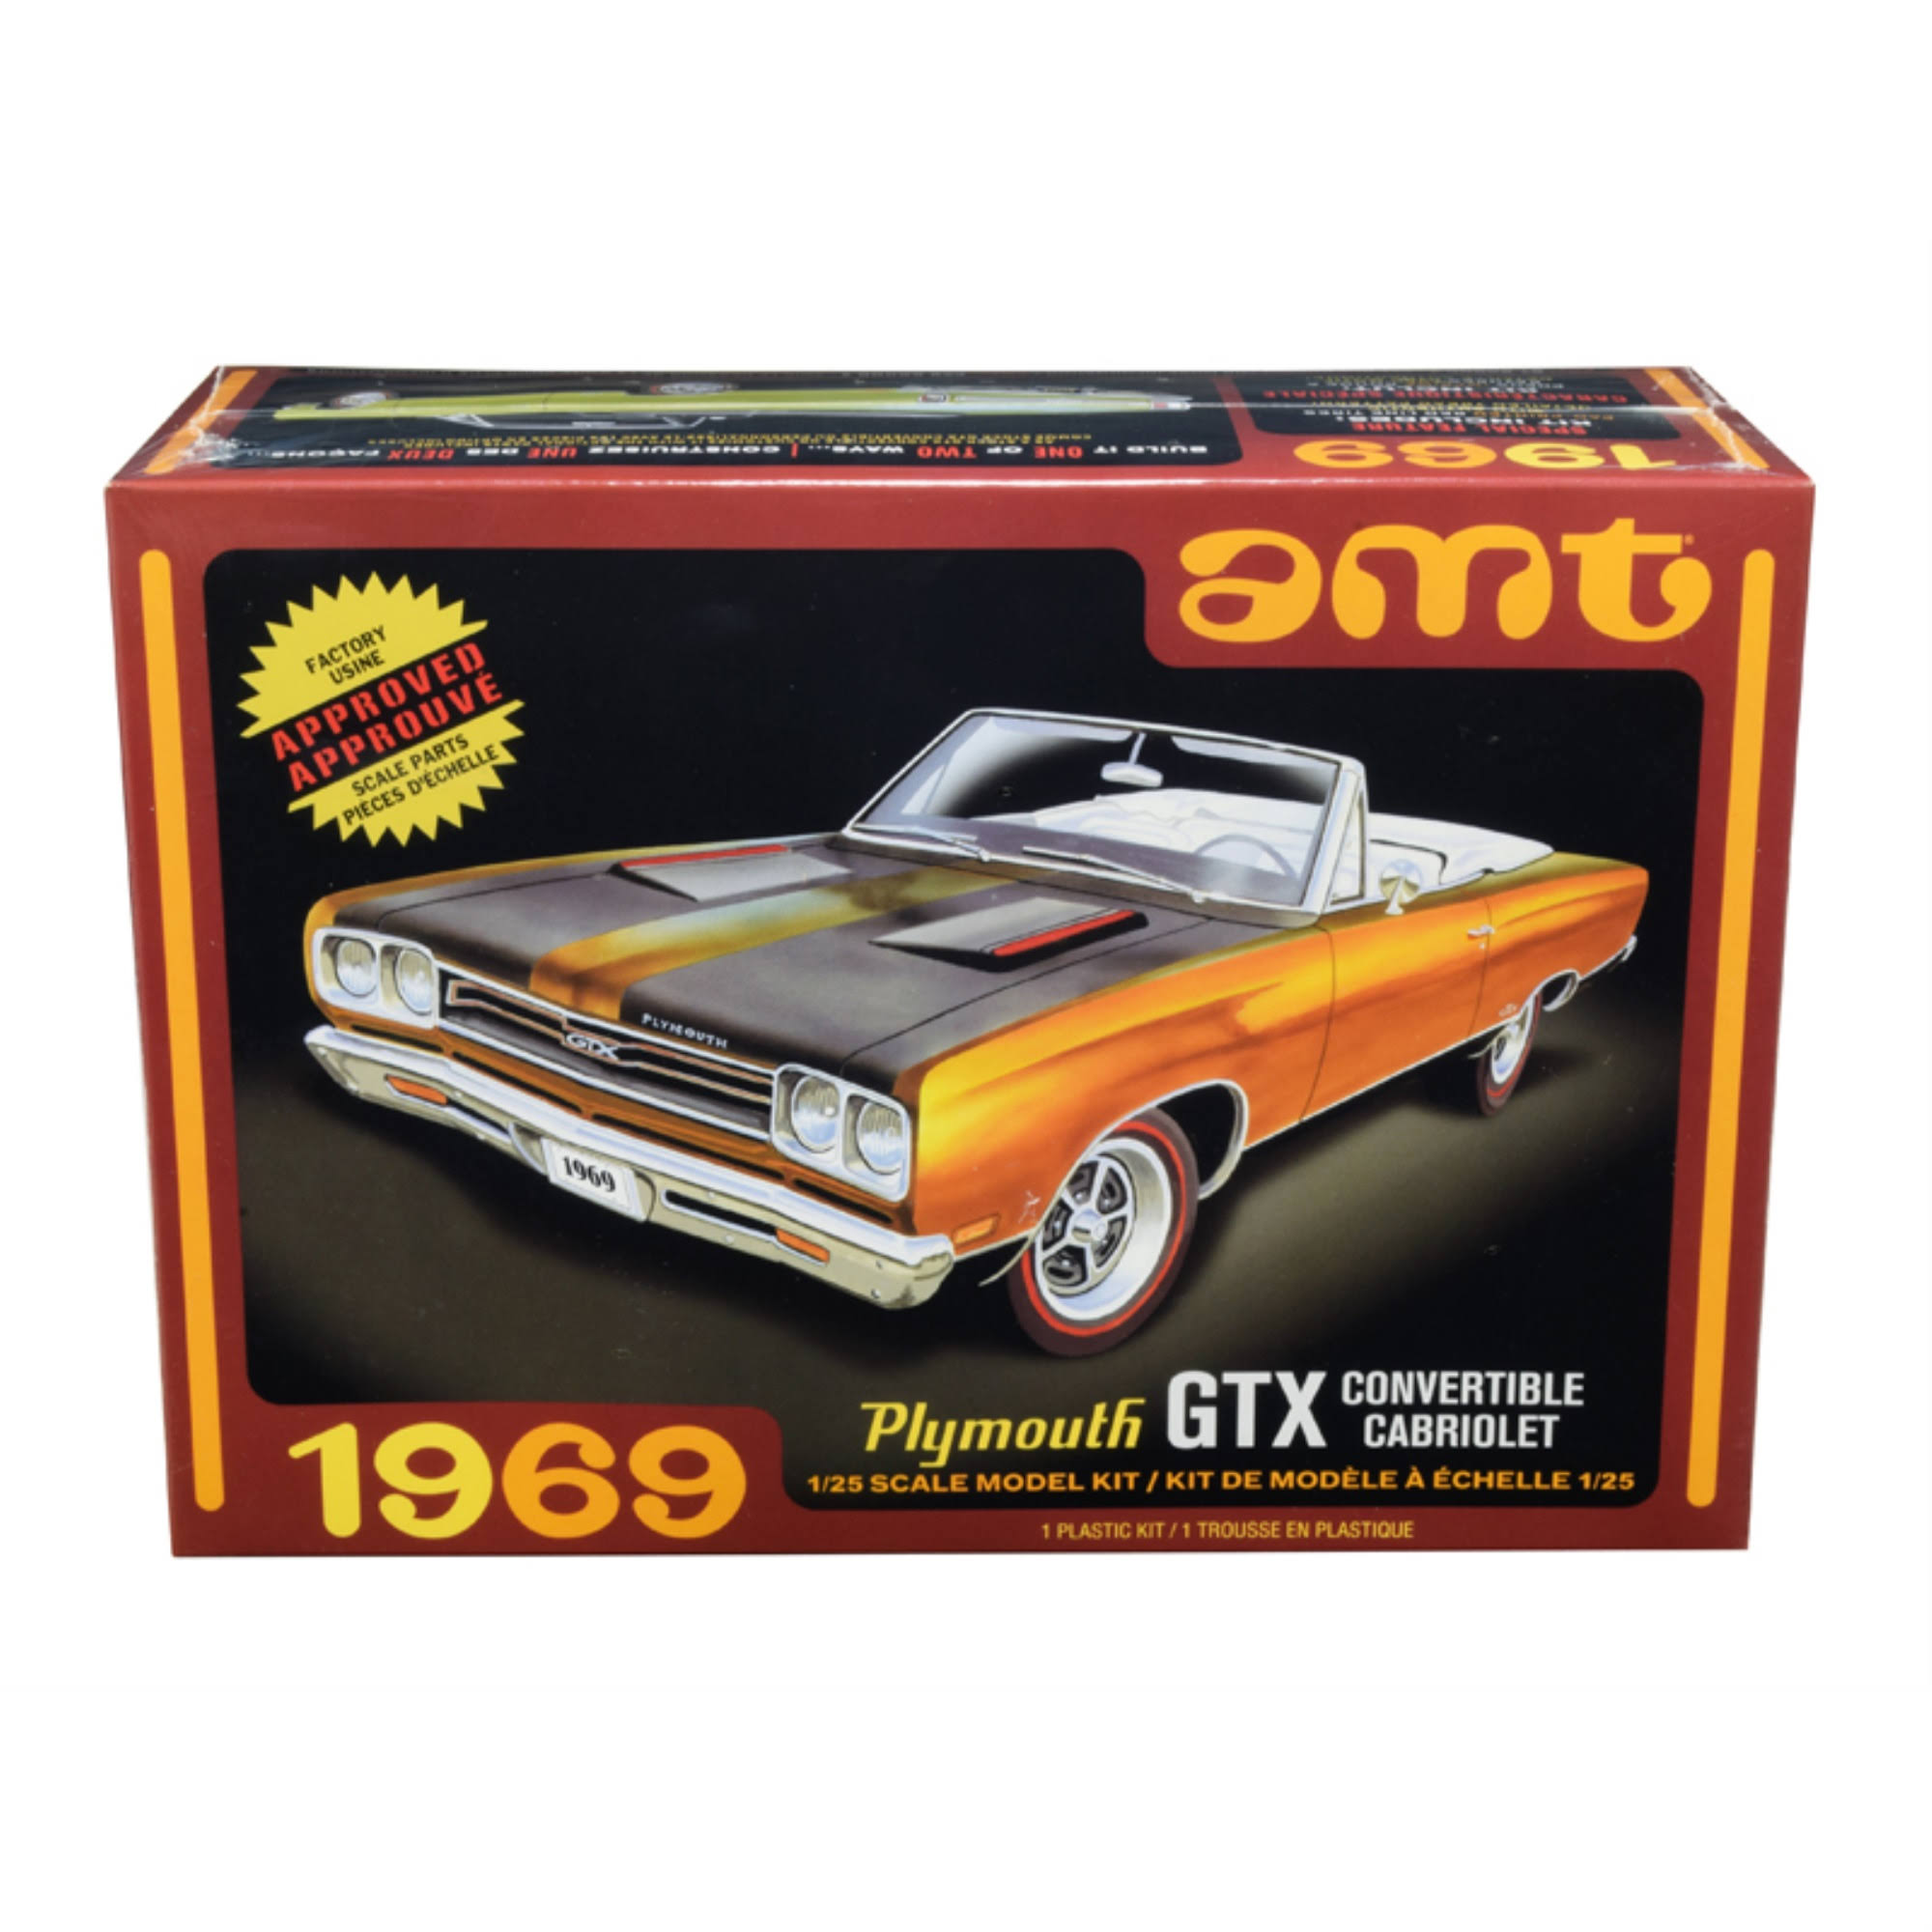 AMT 1969 Plymouth GTX Convertible Model Kit - Scale 1:25